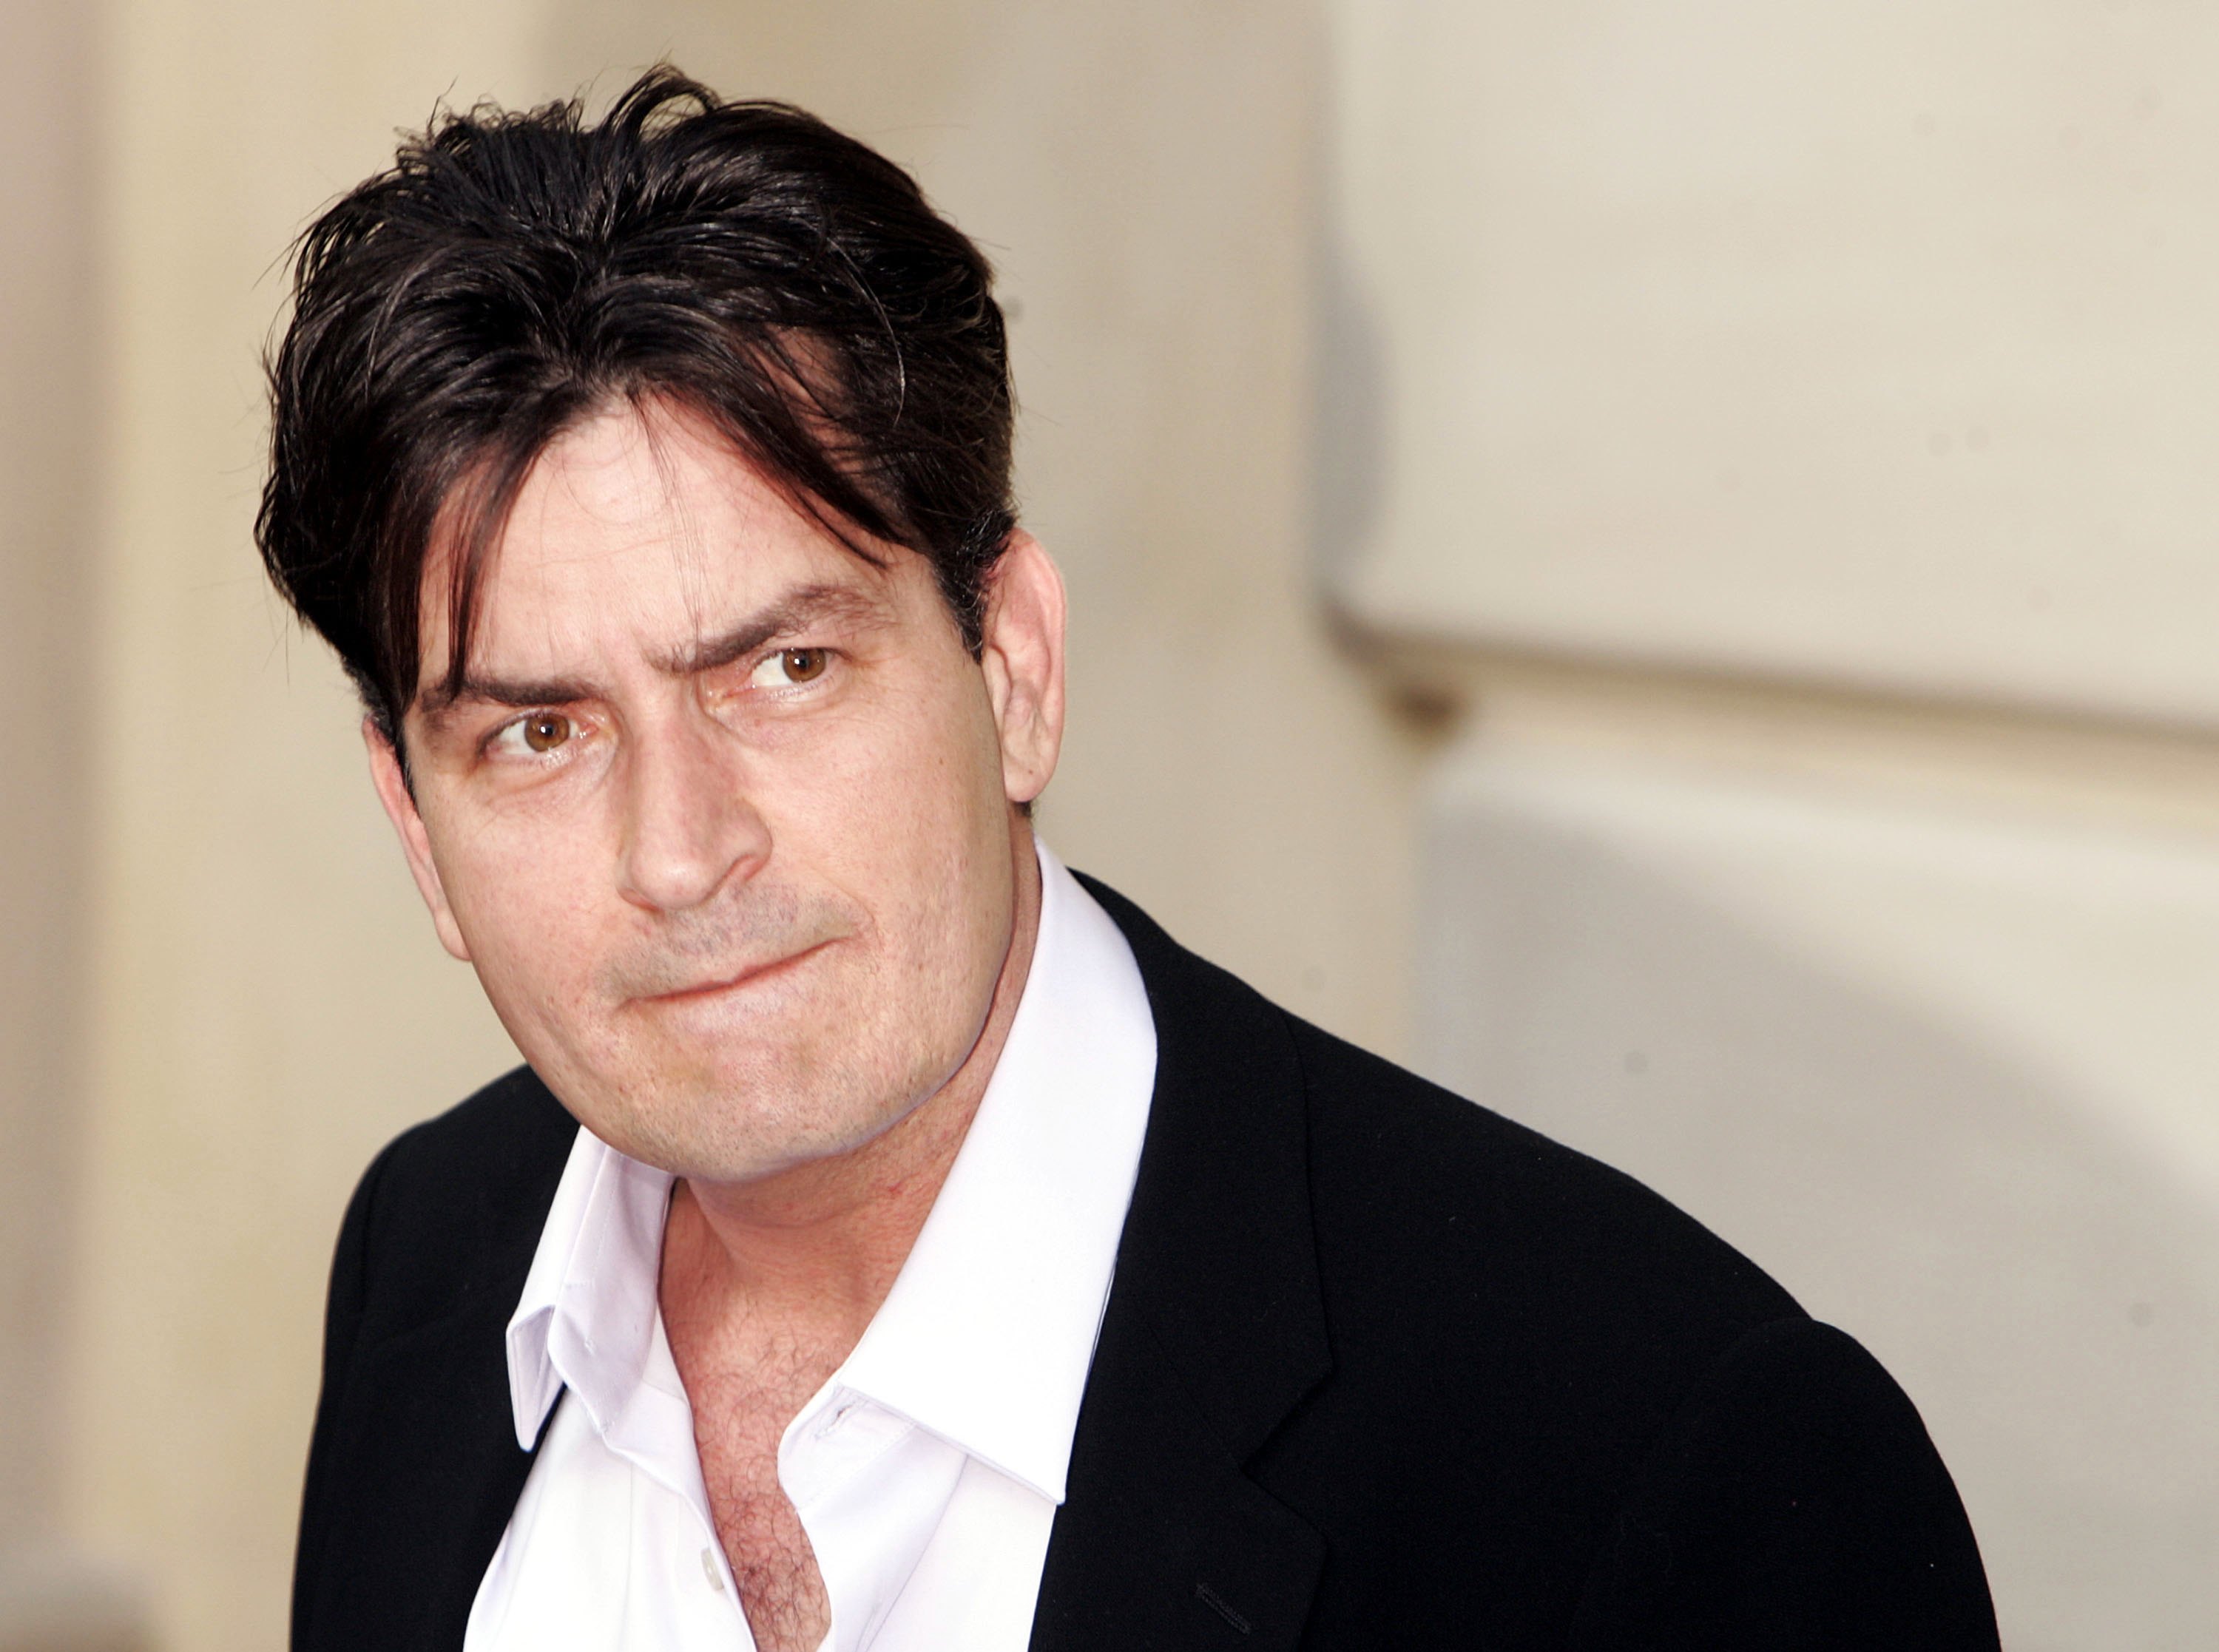 Charlie Sheen | Kevin Winter/Getty Images